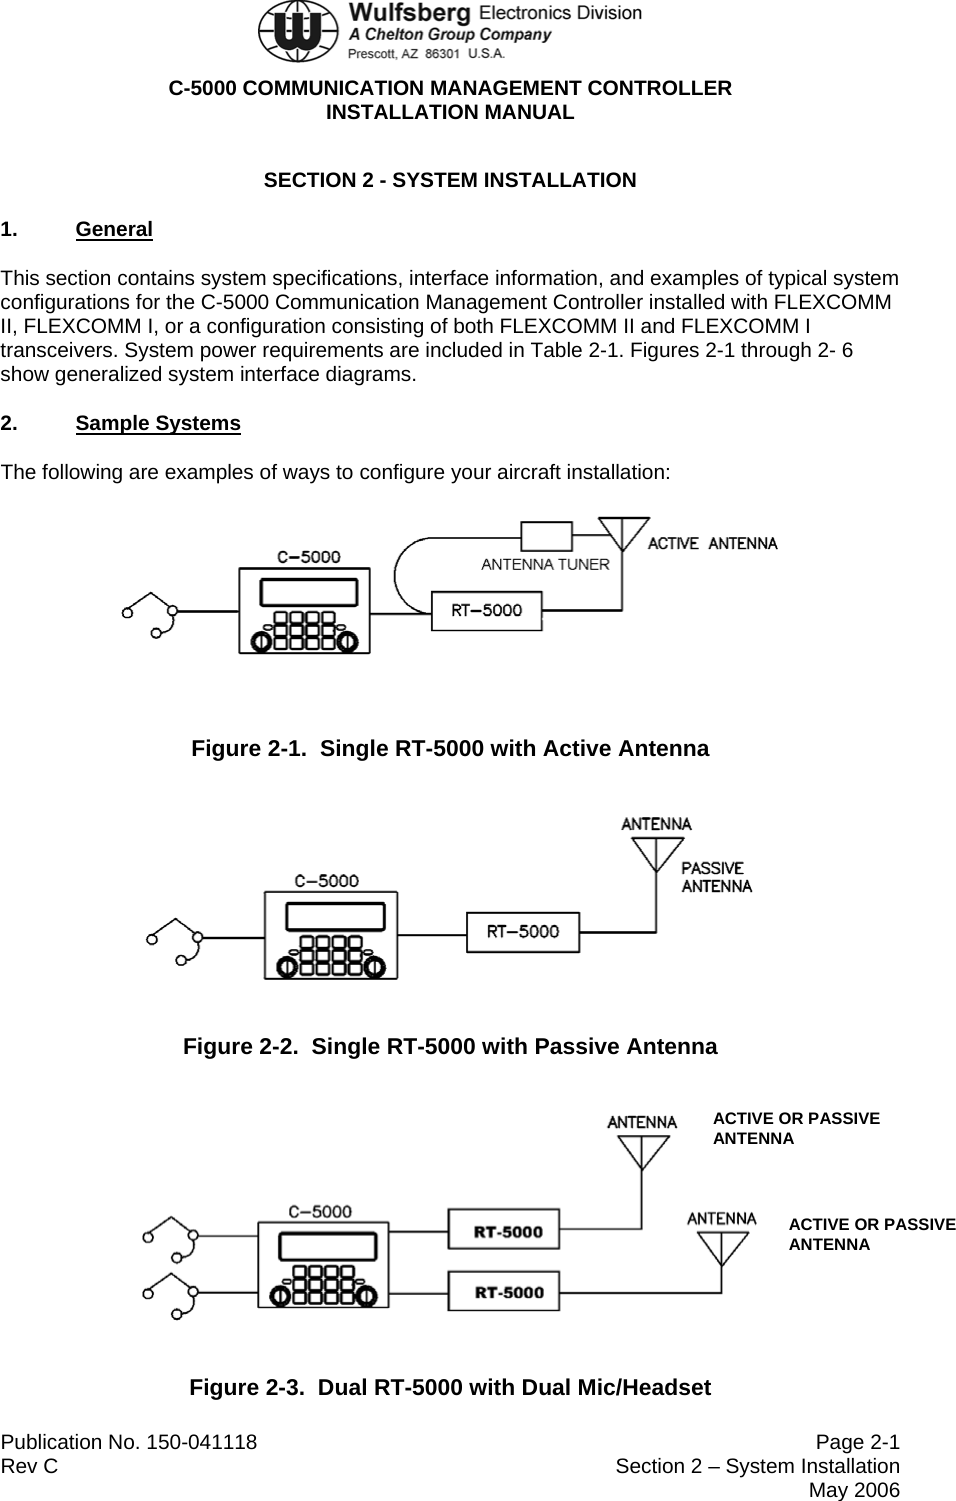  C-5000 COMMUNICATION MANAGEMENT CONTROLLER INSTALLATION MANUAL  Publication No. 150-041118  Page 2-1 Rev C  Section 2 – System Installation  May 2006 SECTION 2 - SYSTEM INSTALLATION 1.  General This section contains system specifications, interface information, and examples of typical system configurations for the C-5000 Communication Management Controller installed with FLEXCOMM II, FLEXCOMM I, or a configuration consisting of both FLEXCOMM II and FLEXCOMM I transceivers. System power requirements are included in Table 2-1. Figures 2-1 through 2- 6 show generalized system interface diagrams.  2.  Sample Systems The following are examples of ways to configure your aircraft installation:  Figure 2-1.  Single RT-5000 with Active Antenna  Figure 2-2.  Single RT-5000 with Passive Antenna  ACTIVE OR PASSIVE ANTENNA ACTIVE OR PASSIVE ANTENNA Figure 2-3.  Dual RT-5000 with Dual Mic/Headset 